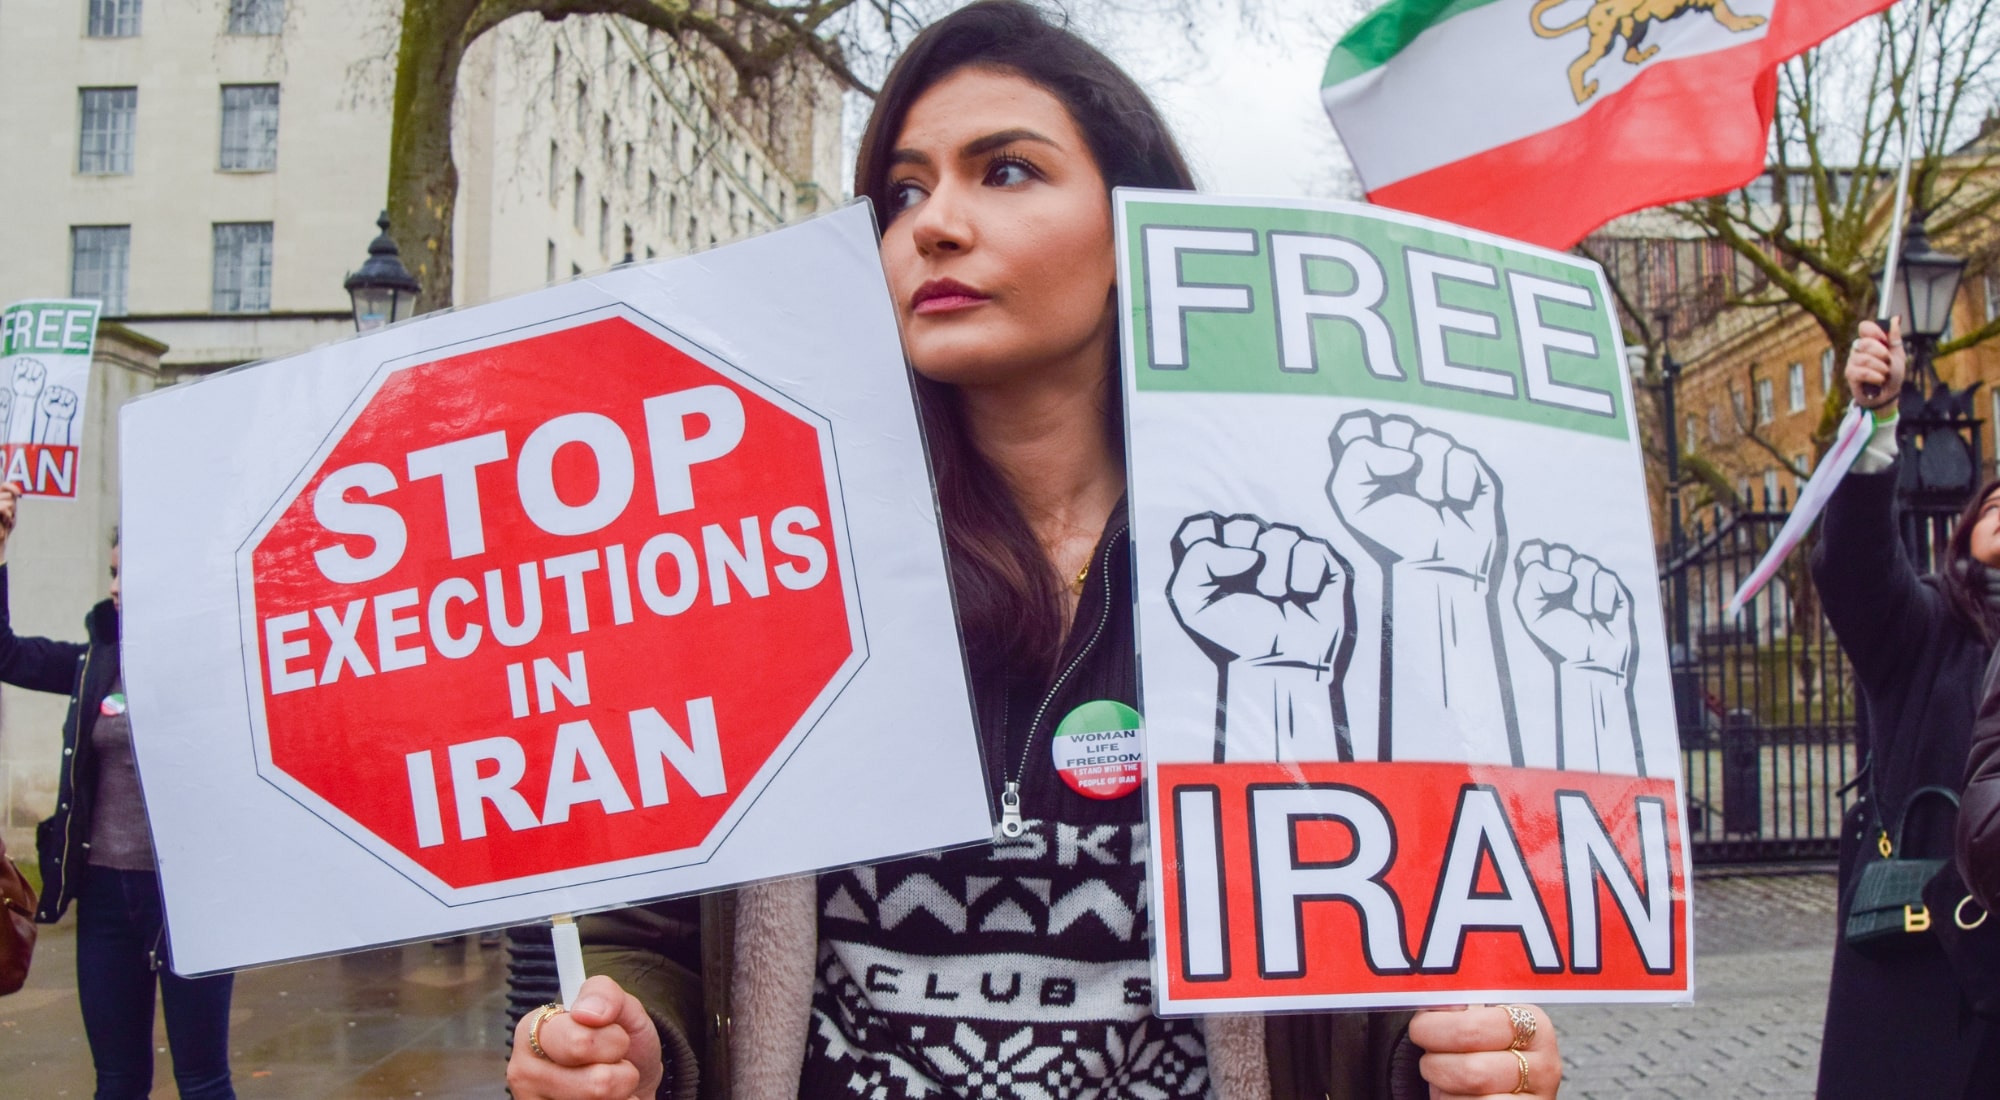 A protester holds 'Stop executions in Iran' and 'Free Iran' placards during a London demonstration on January 14, 2023. Demonstrators gathered outside Downing Street in protest against executions in Iran and support of freedom for Iran. (Photo by Vuk Valcic/SOPA Images/LightRocket via Getty Images)